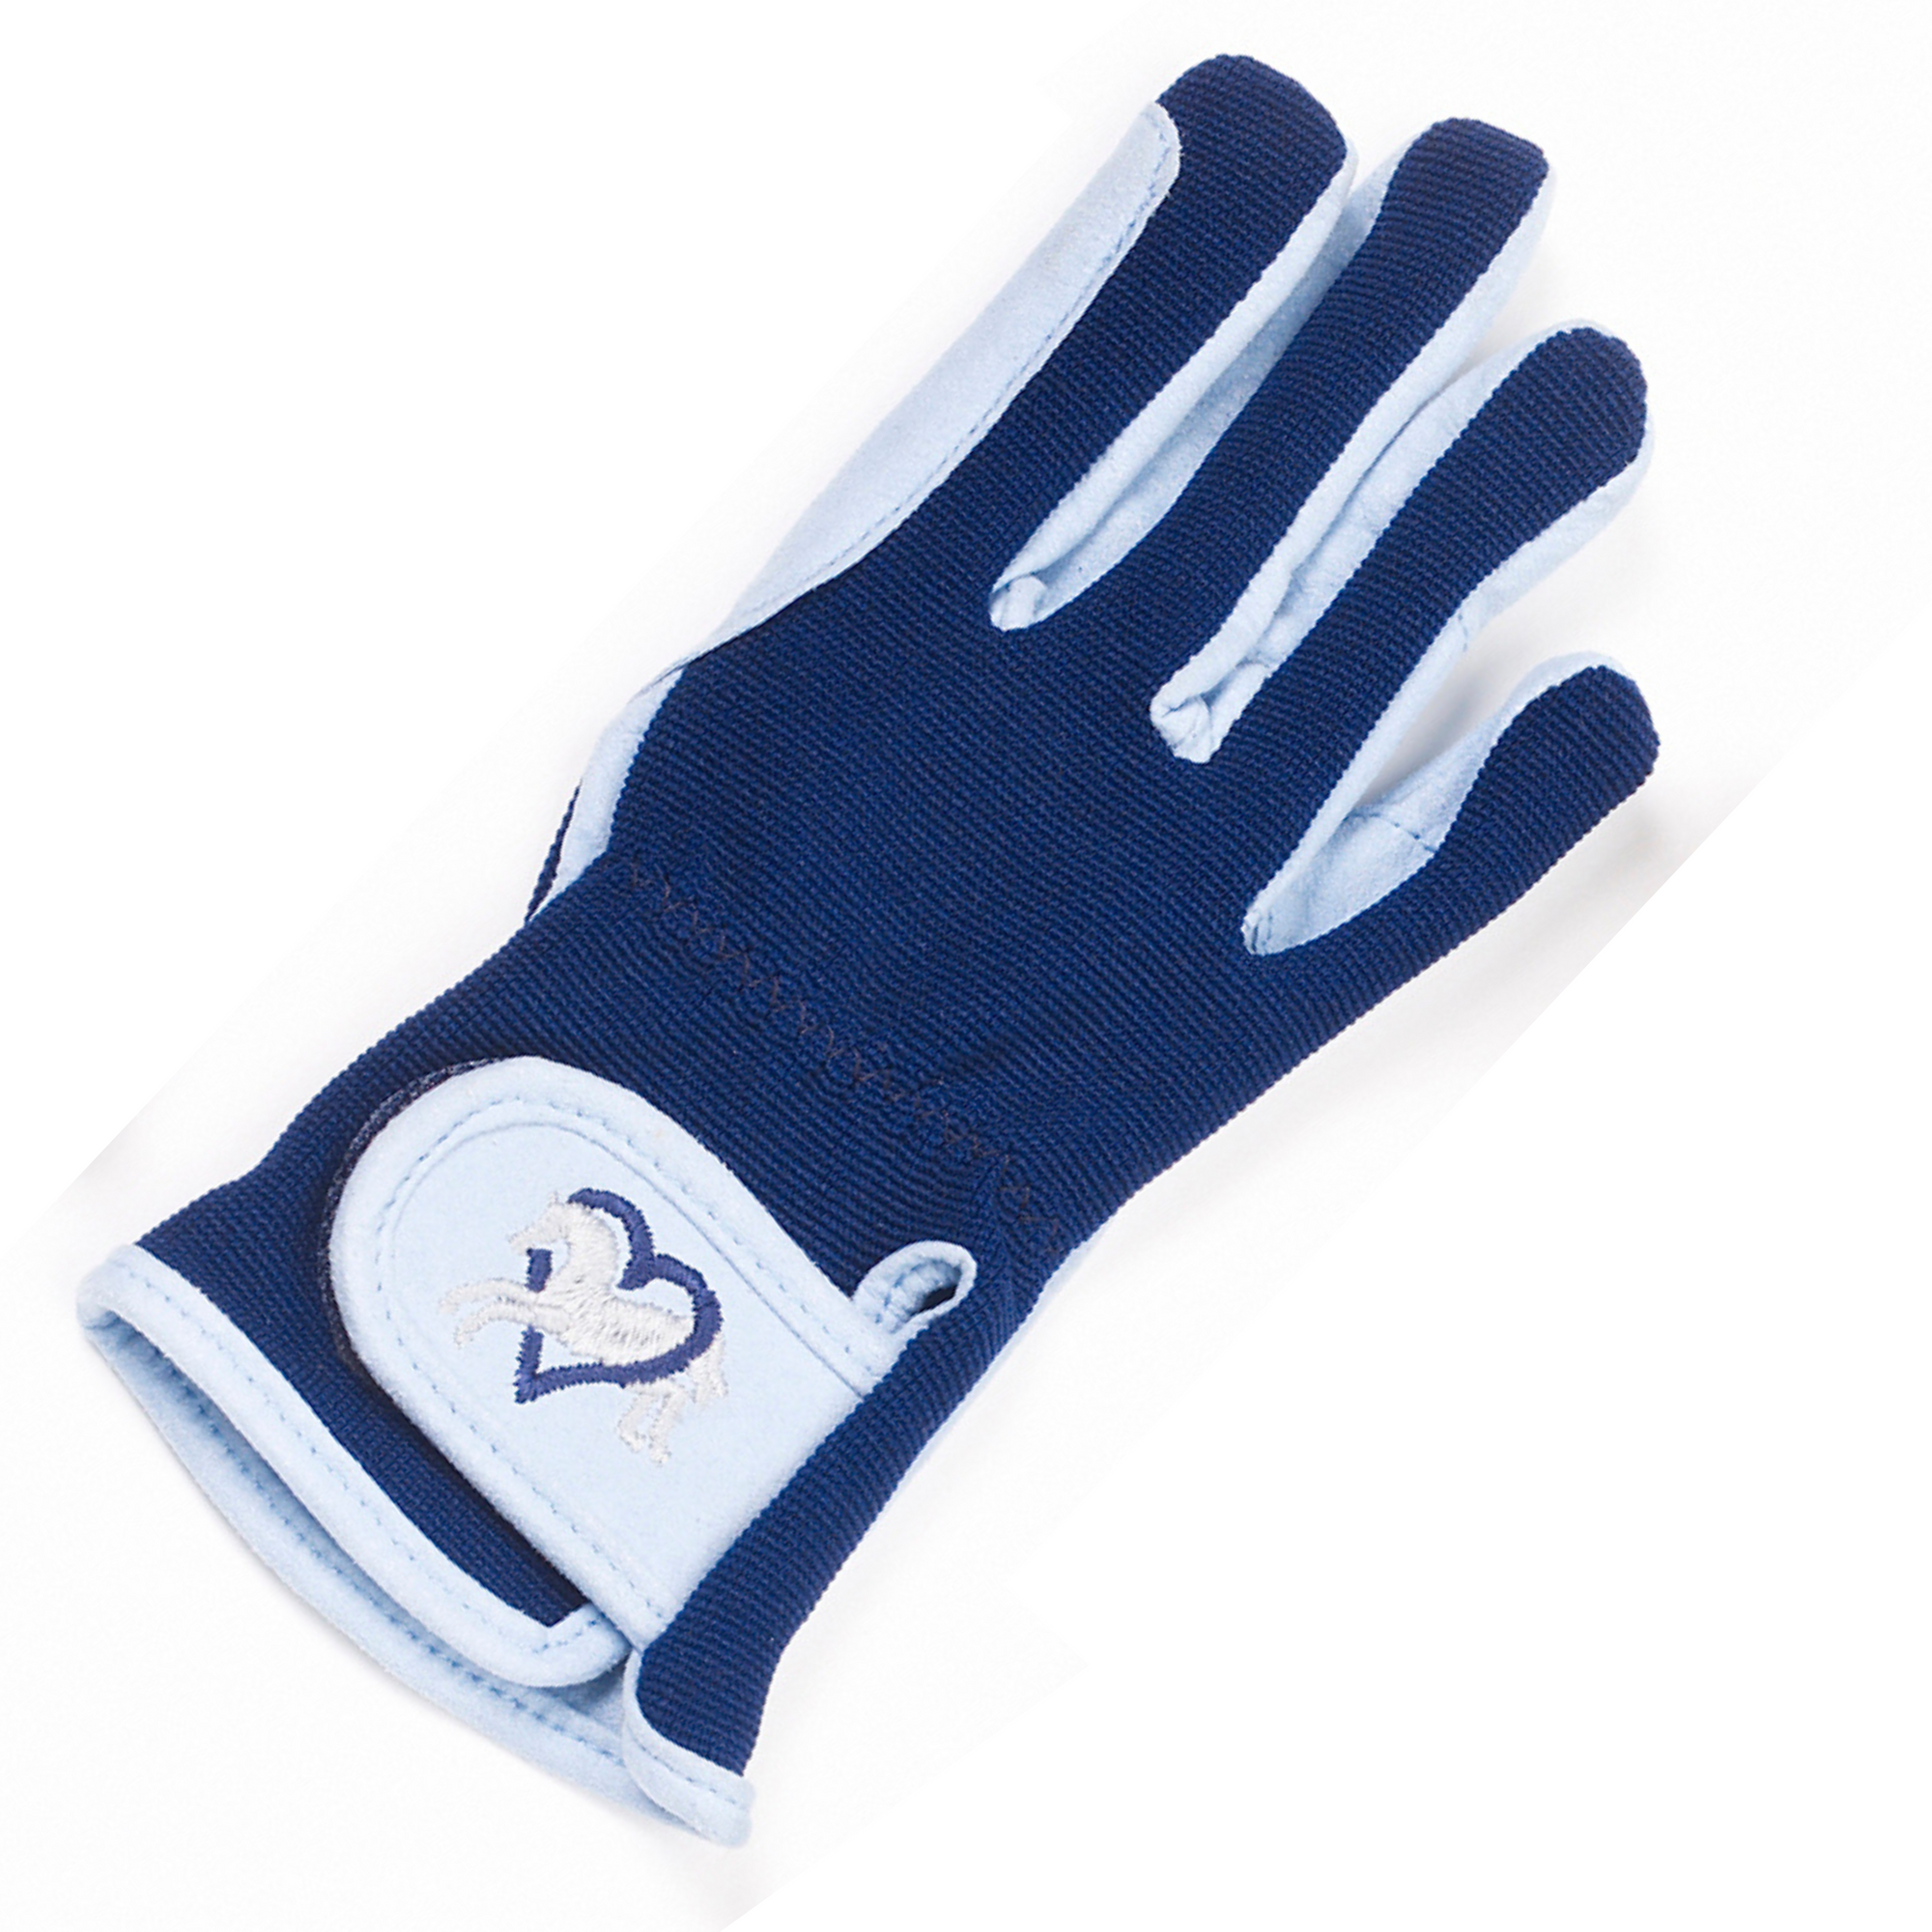 Ovation Hearts &amp; Horses Glove in Sky Blue/Navy - Children&#39;s Small (4-4.5)